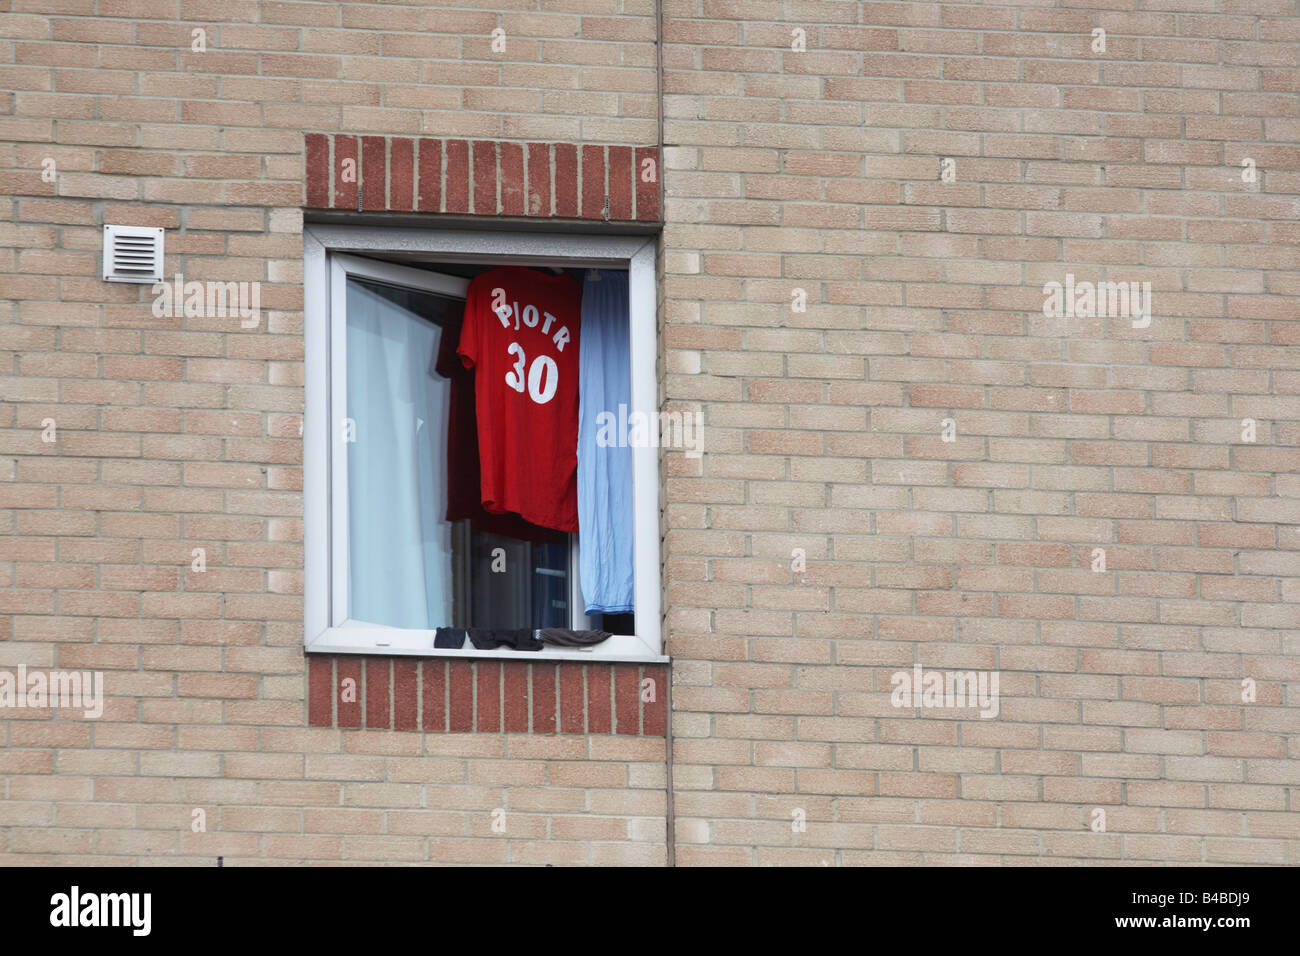 A Polish football shirt belonging to Piotr dries on a hangar in an open Ibis hotel window in industrial West Thurrock Stock Photo